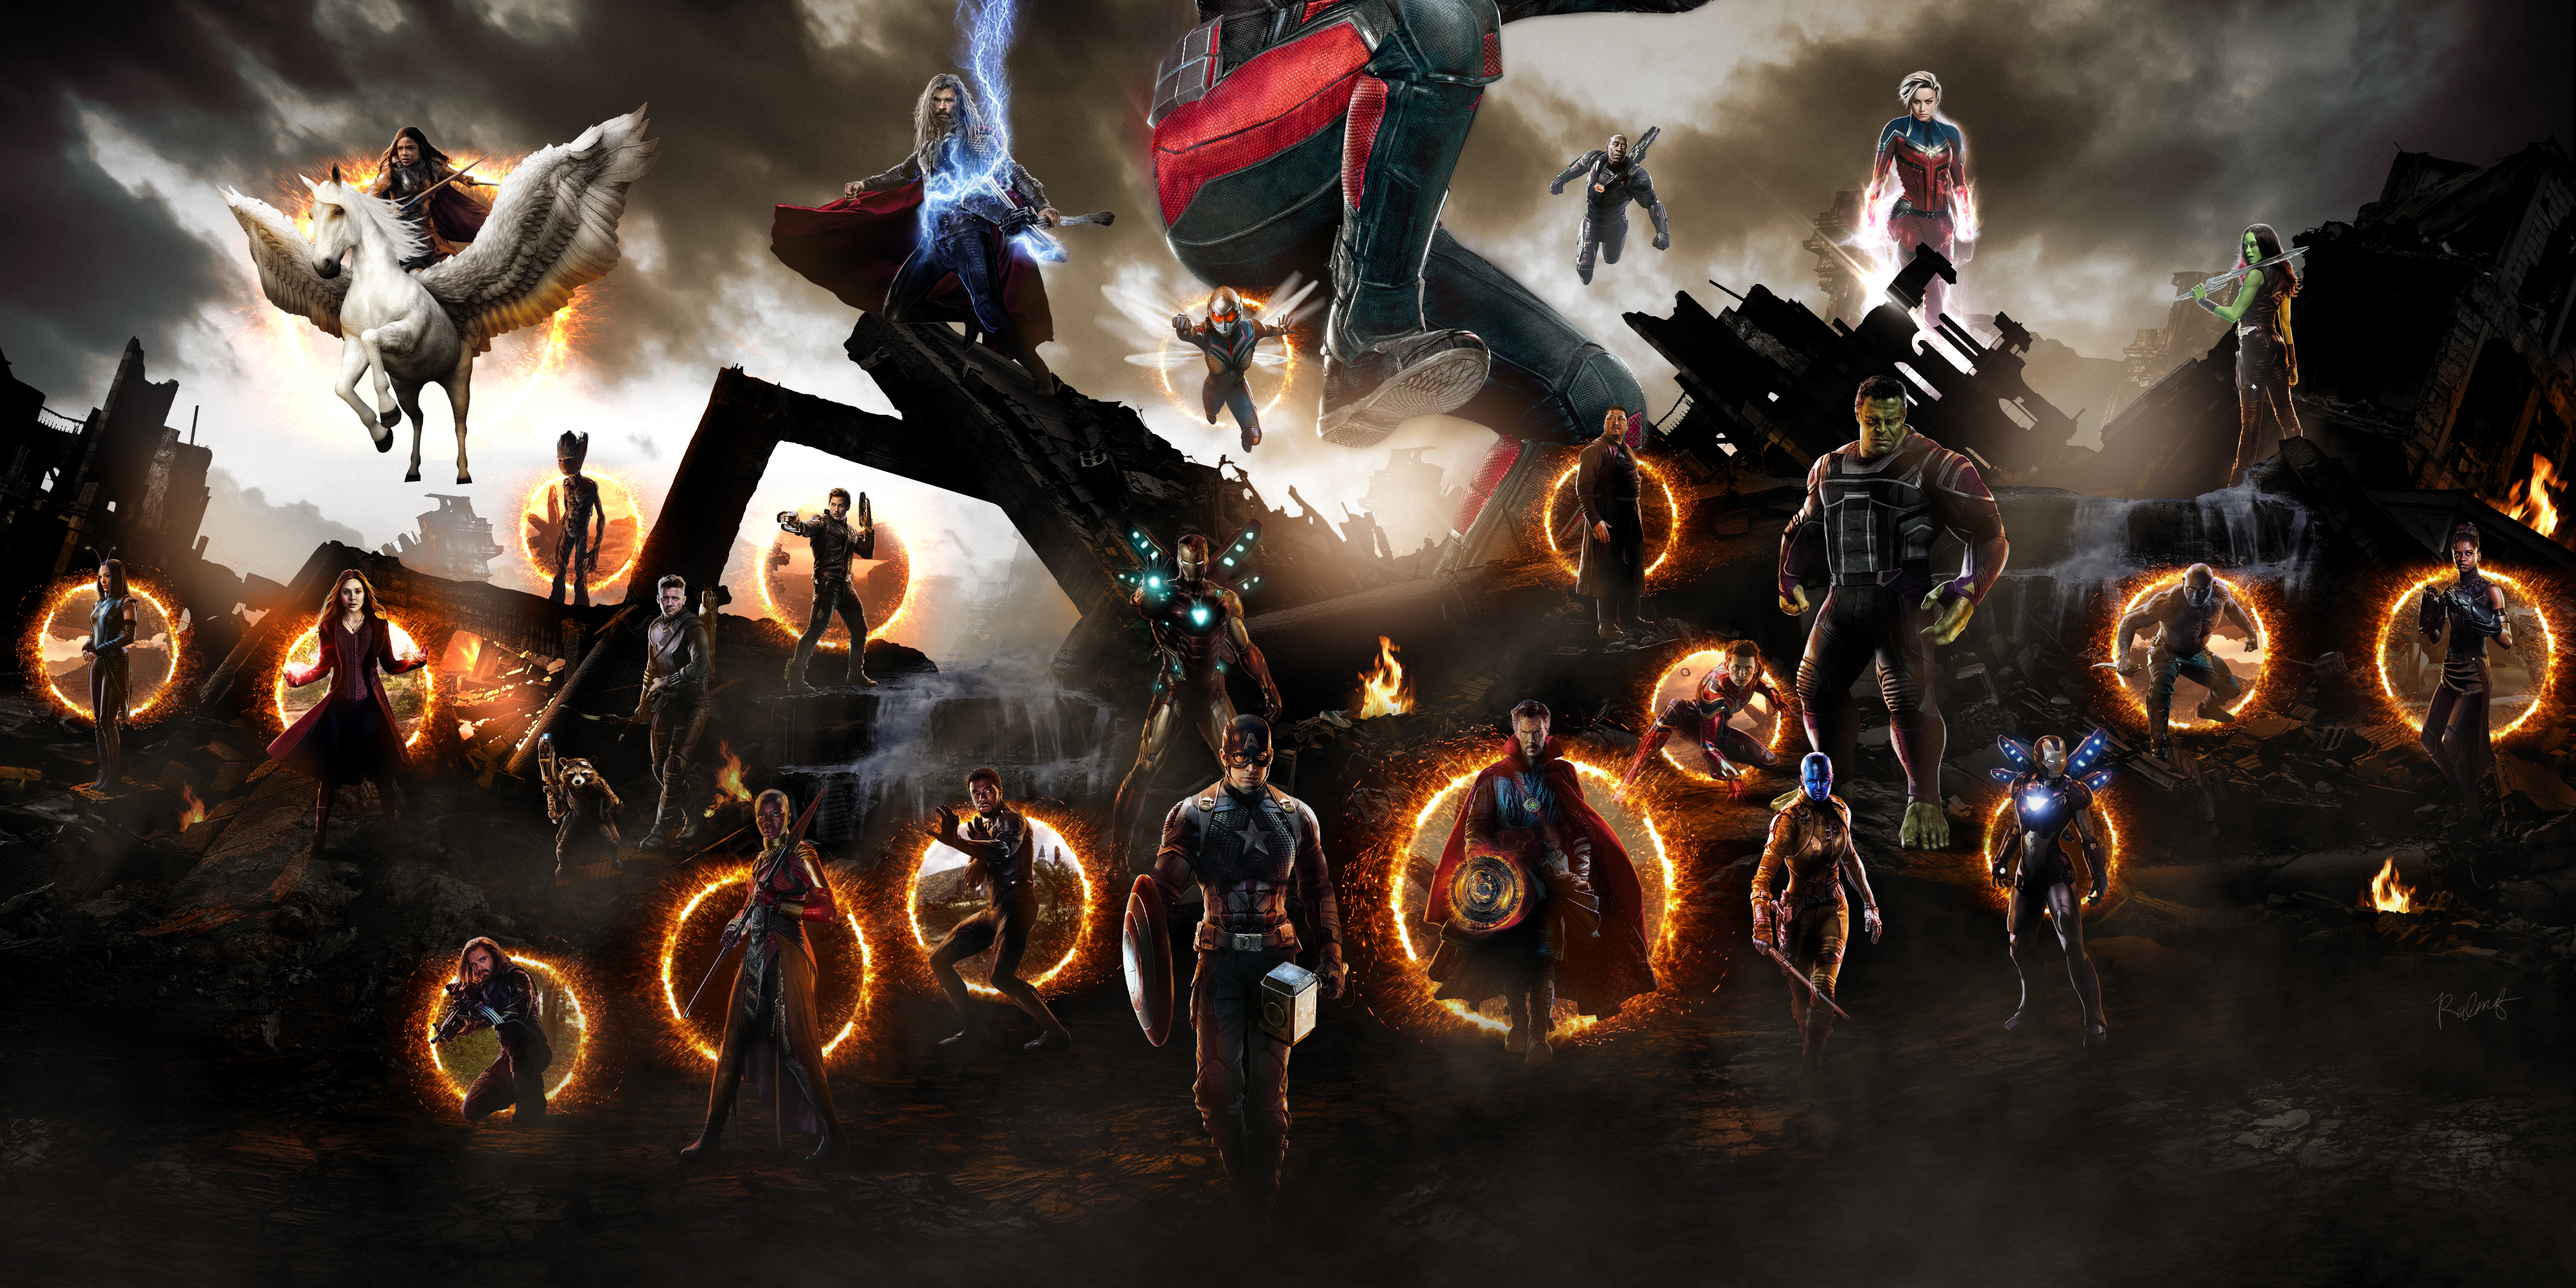 Free photo All characters from the movie Avengers finale